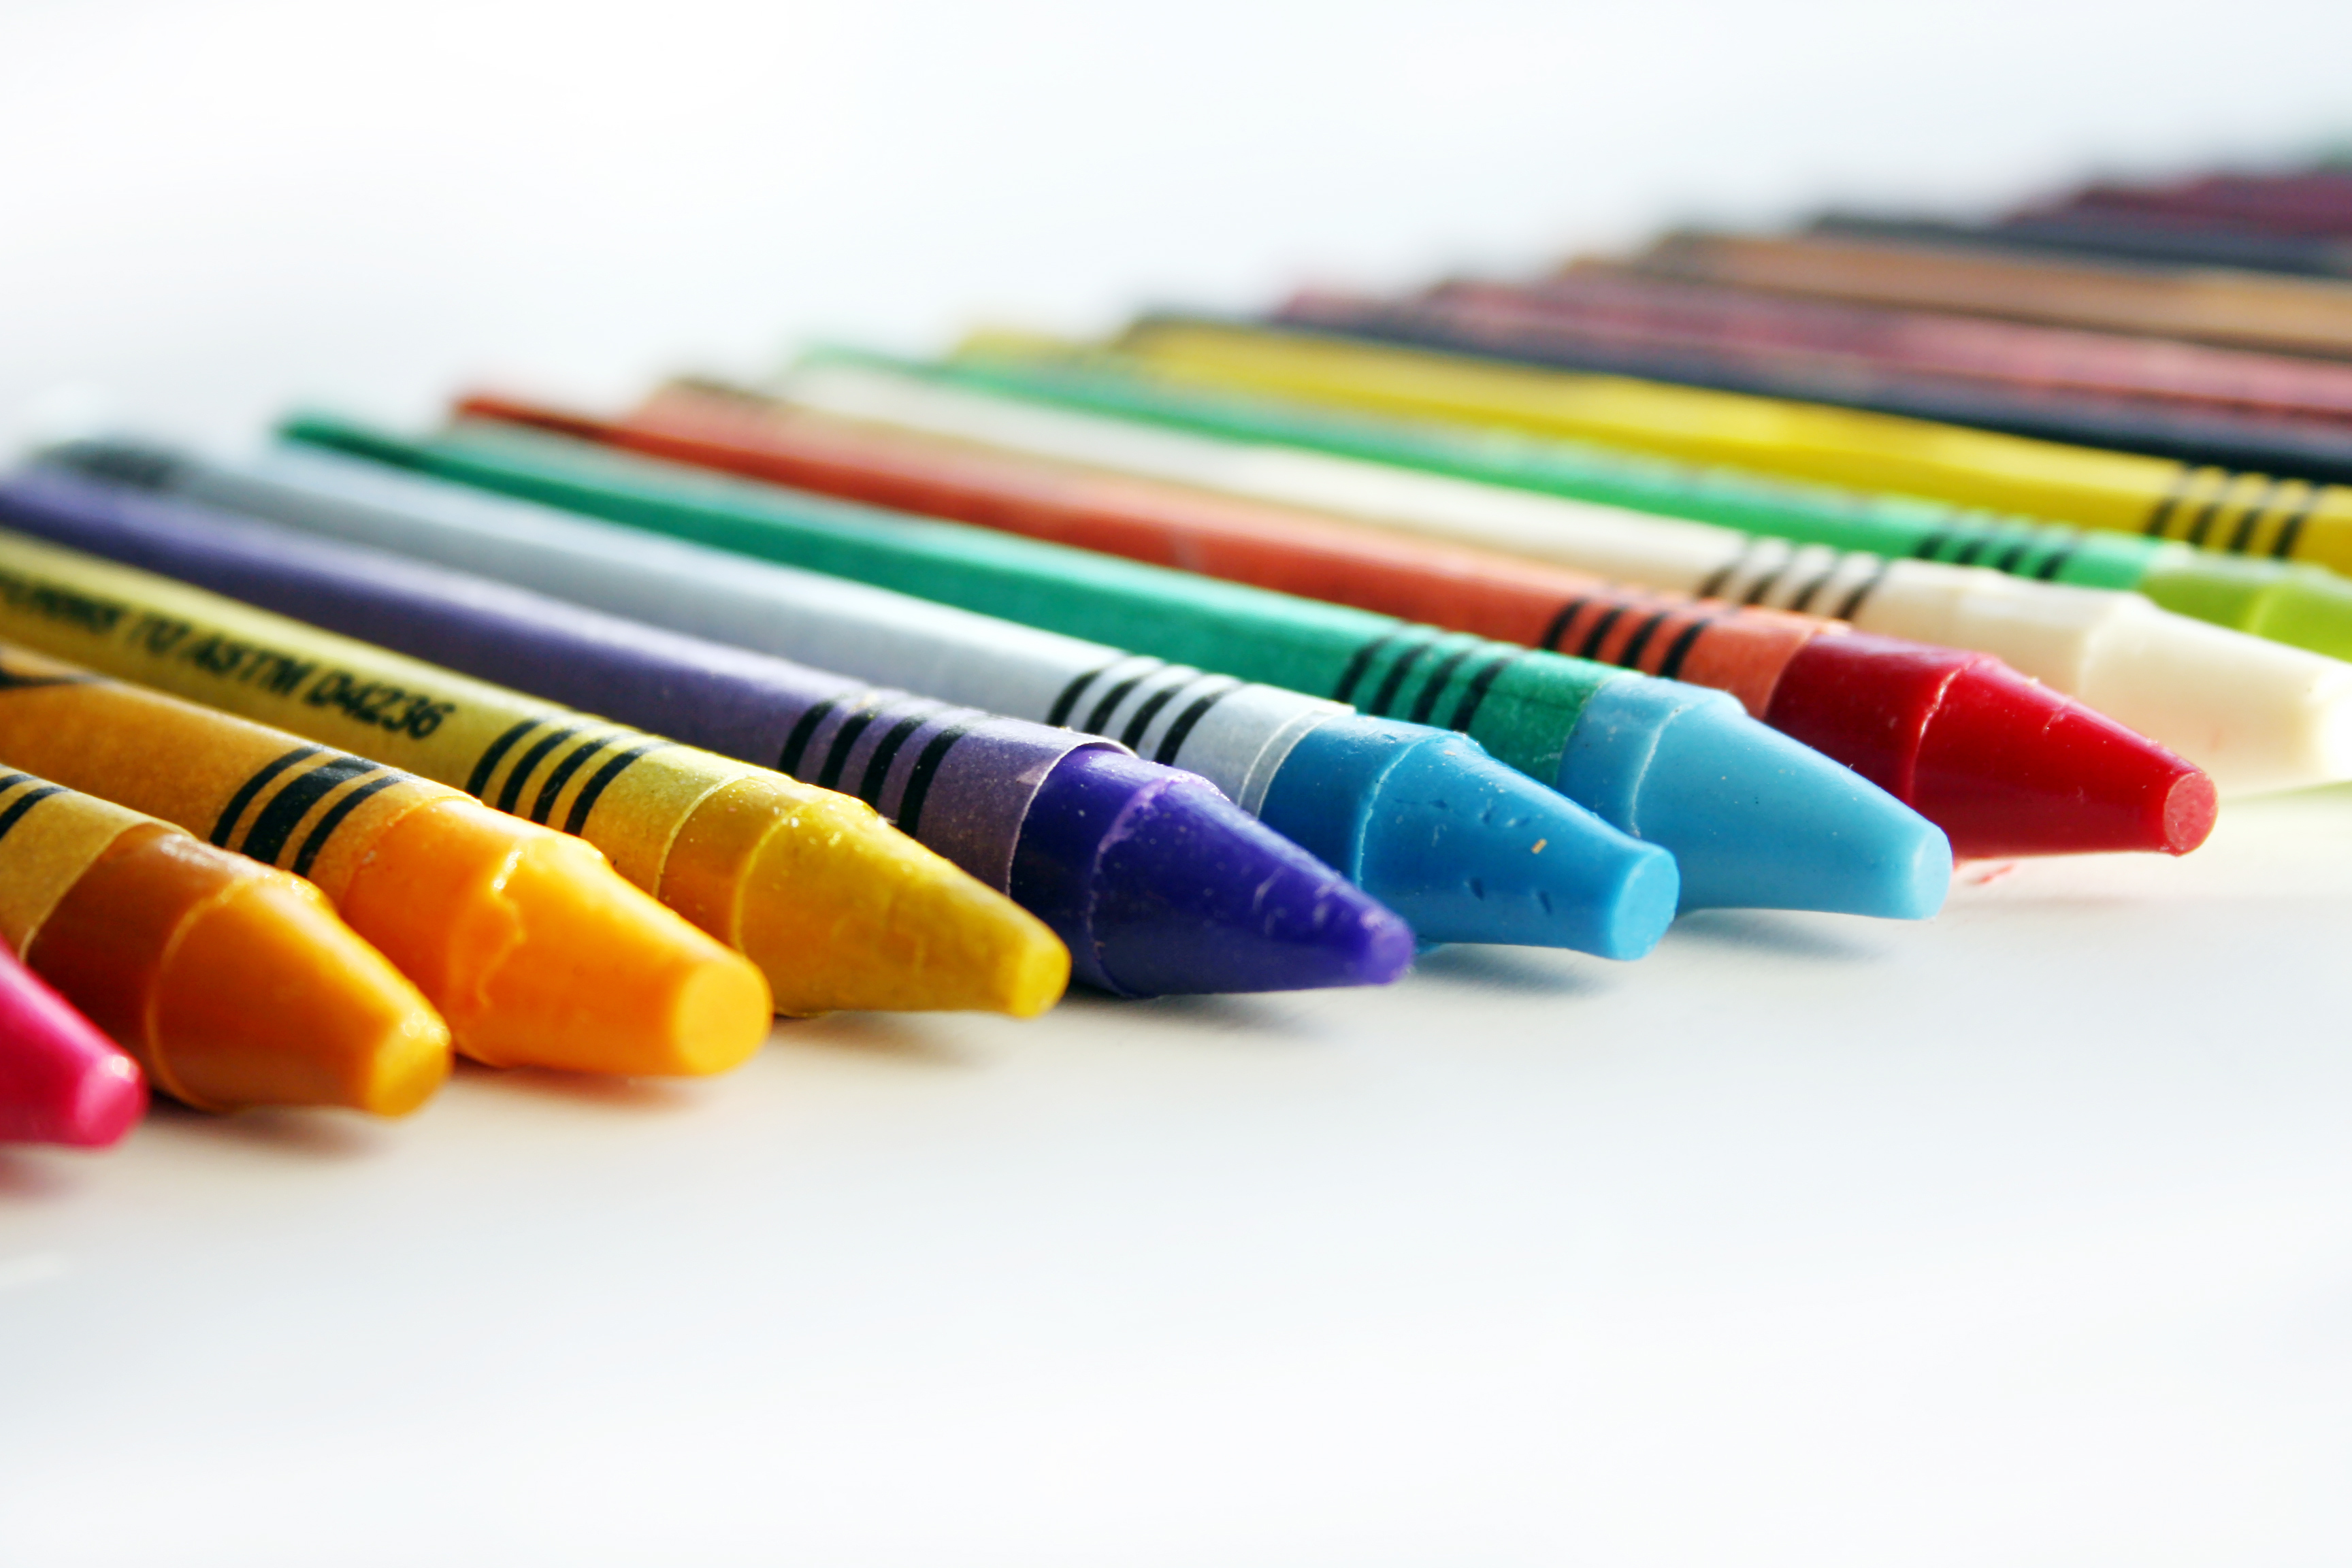 row of new crayons